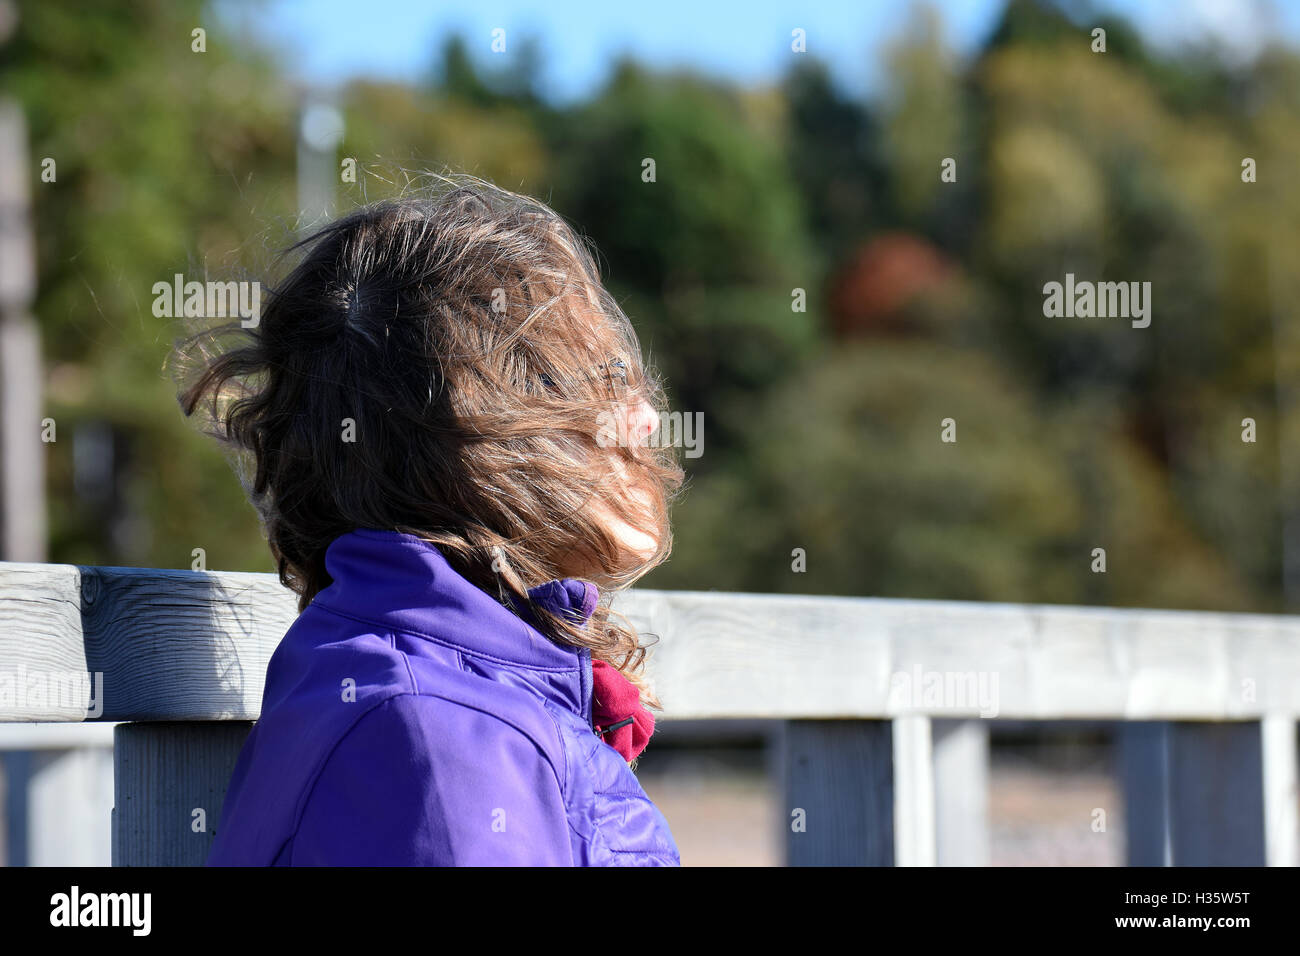 Woman daydreaming. Wind blowing her hair. Stock Photo